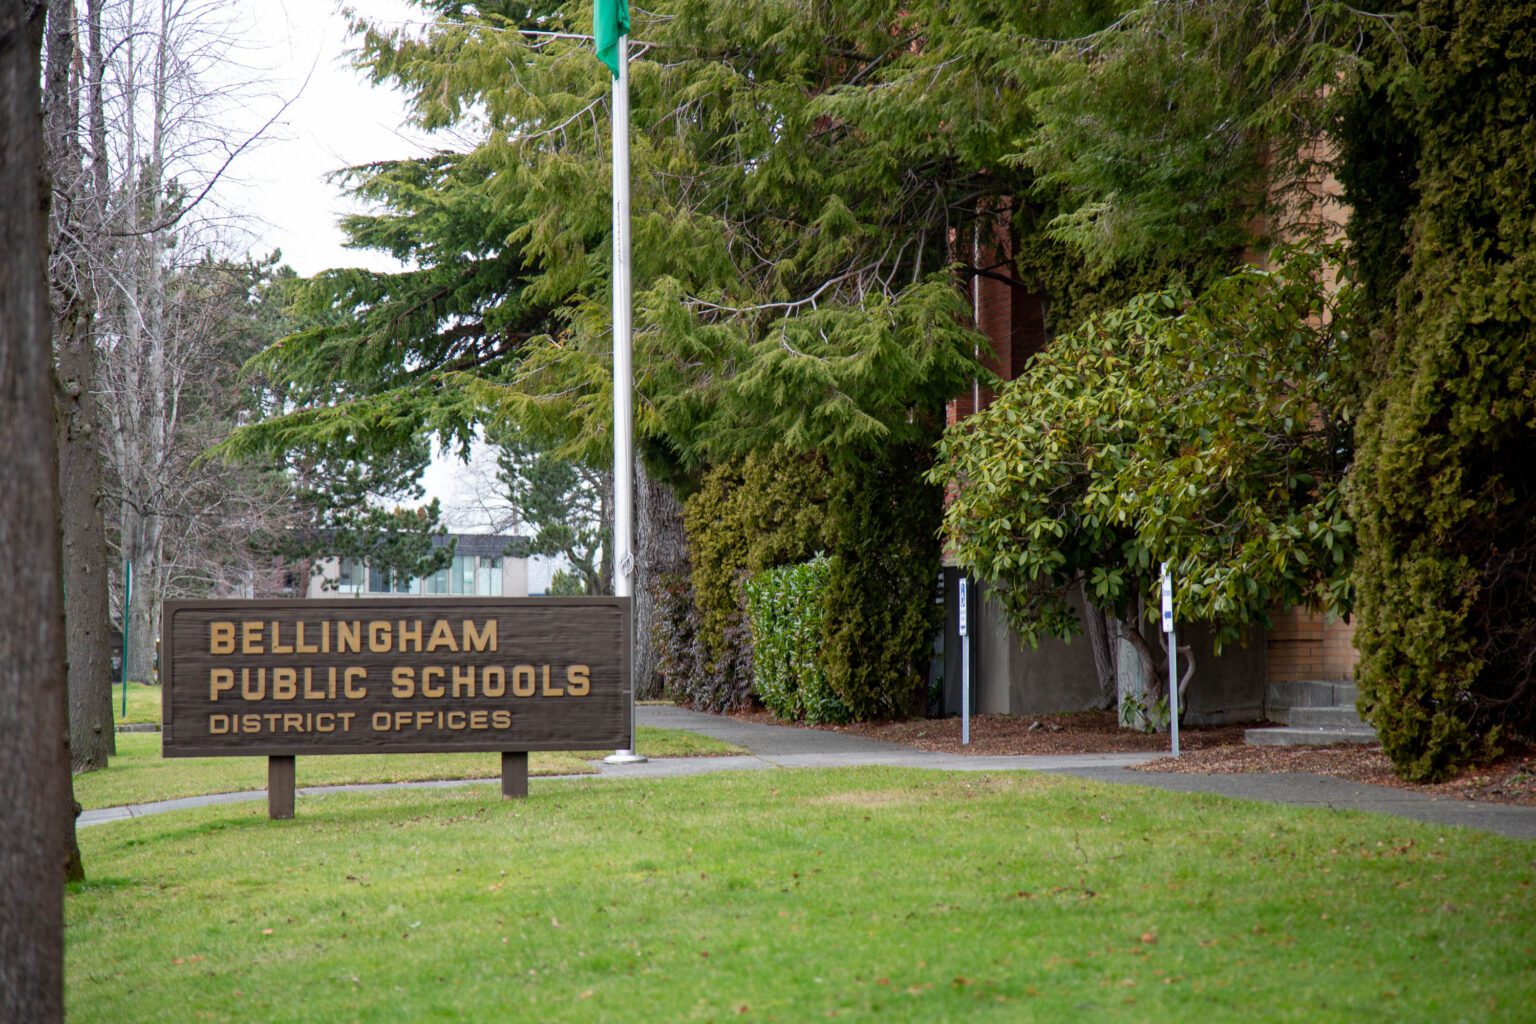 Bellingham Public Schools received the Green Ribbon for sustainability from the U.S. Department of Education.